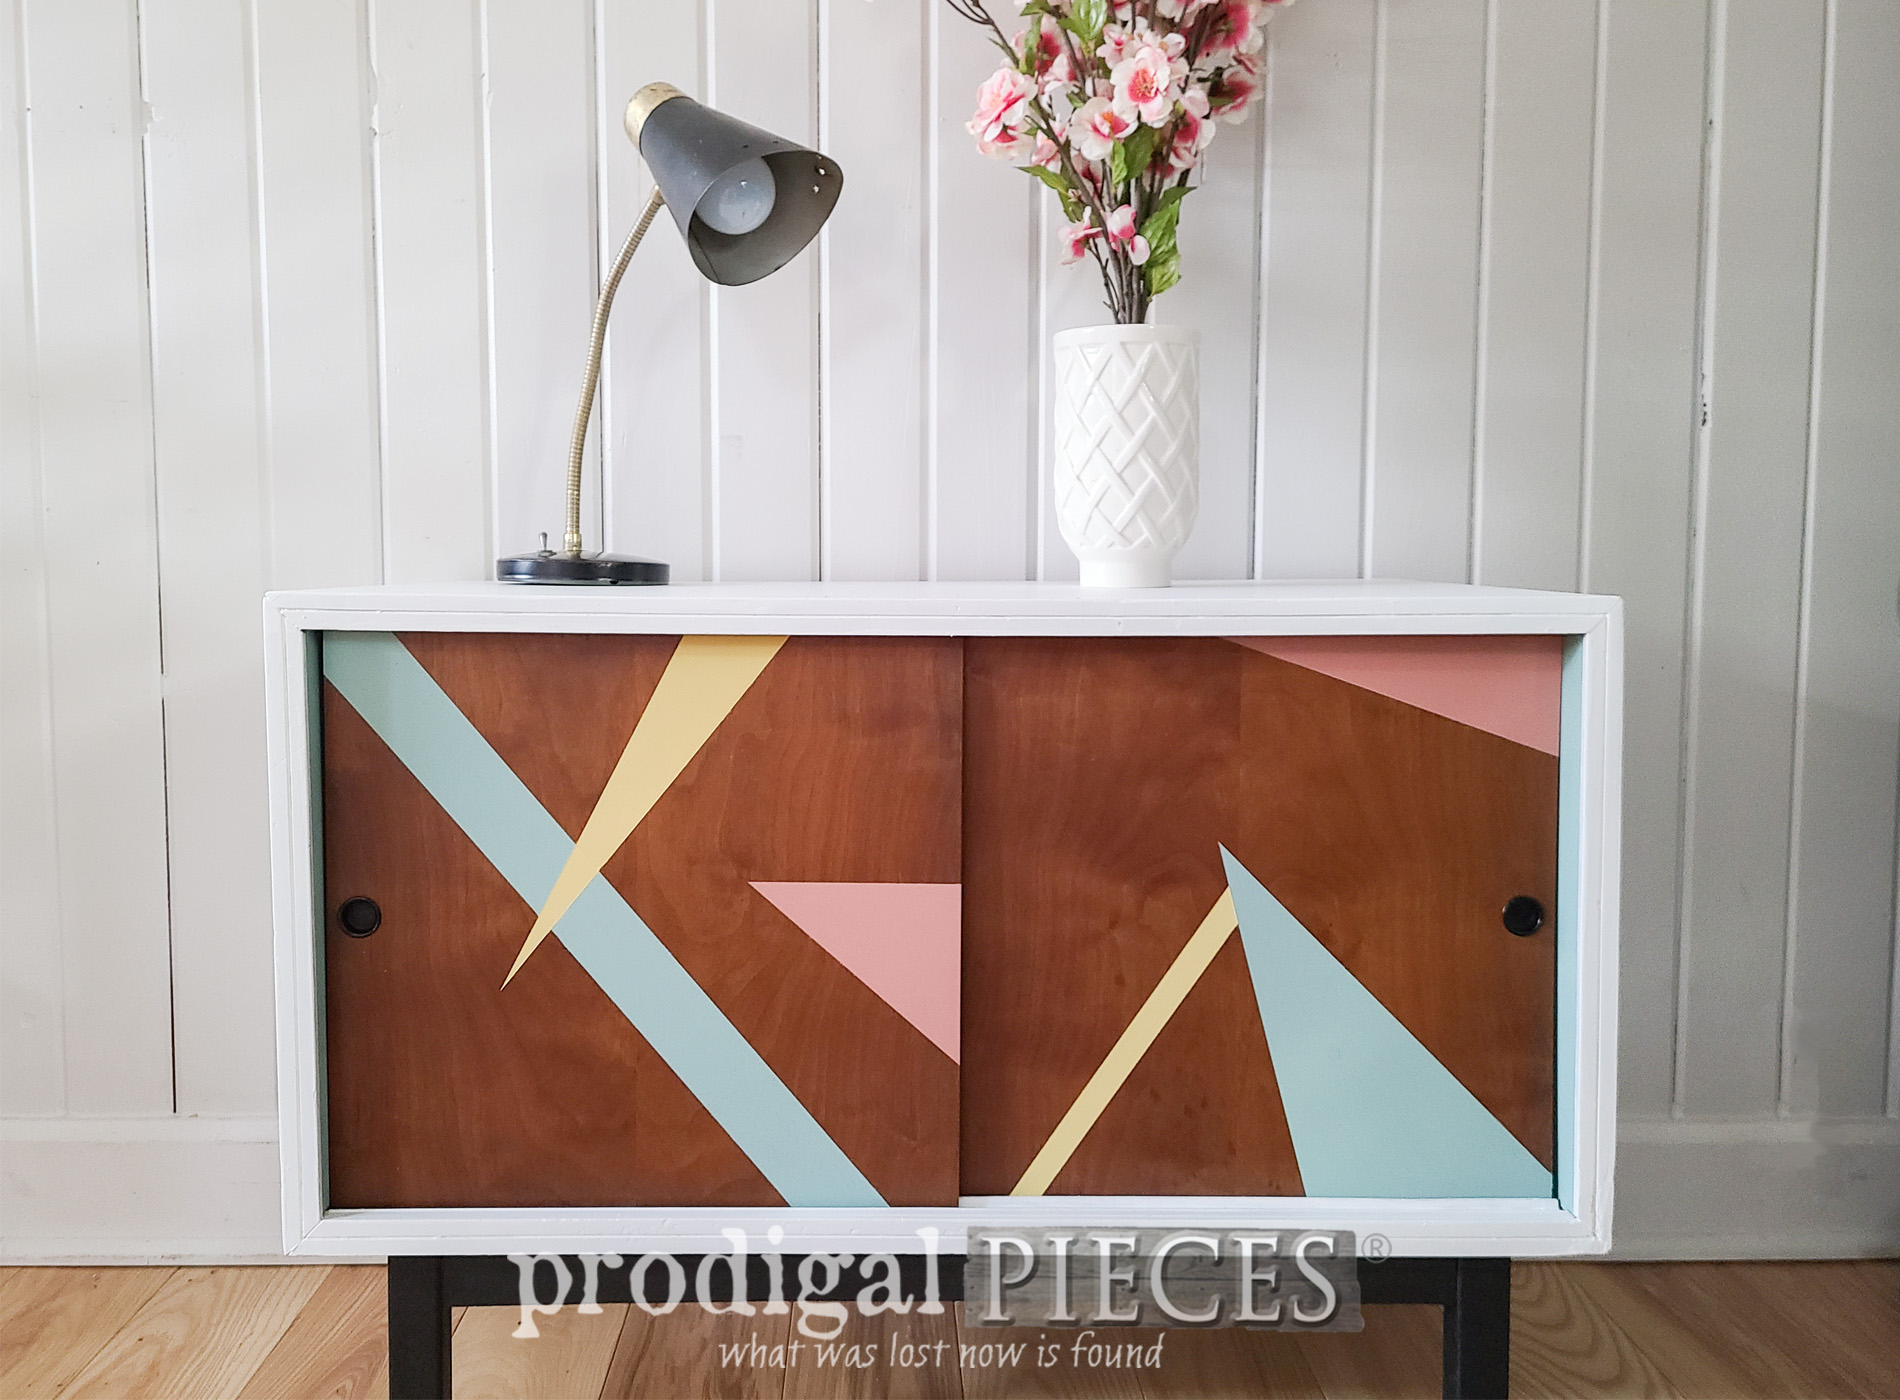 Featured Vintage Lane Entertainment Center Makeover by Larissa of Prodigal Pieces | prodigalpieces.com #prodigalpieces #vintage #furniure #mcm #midcentury